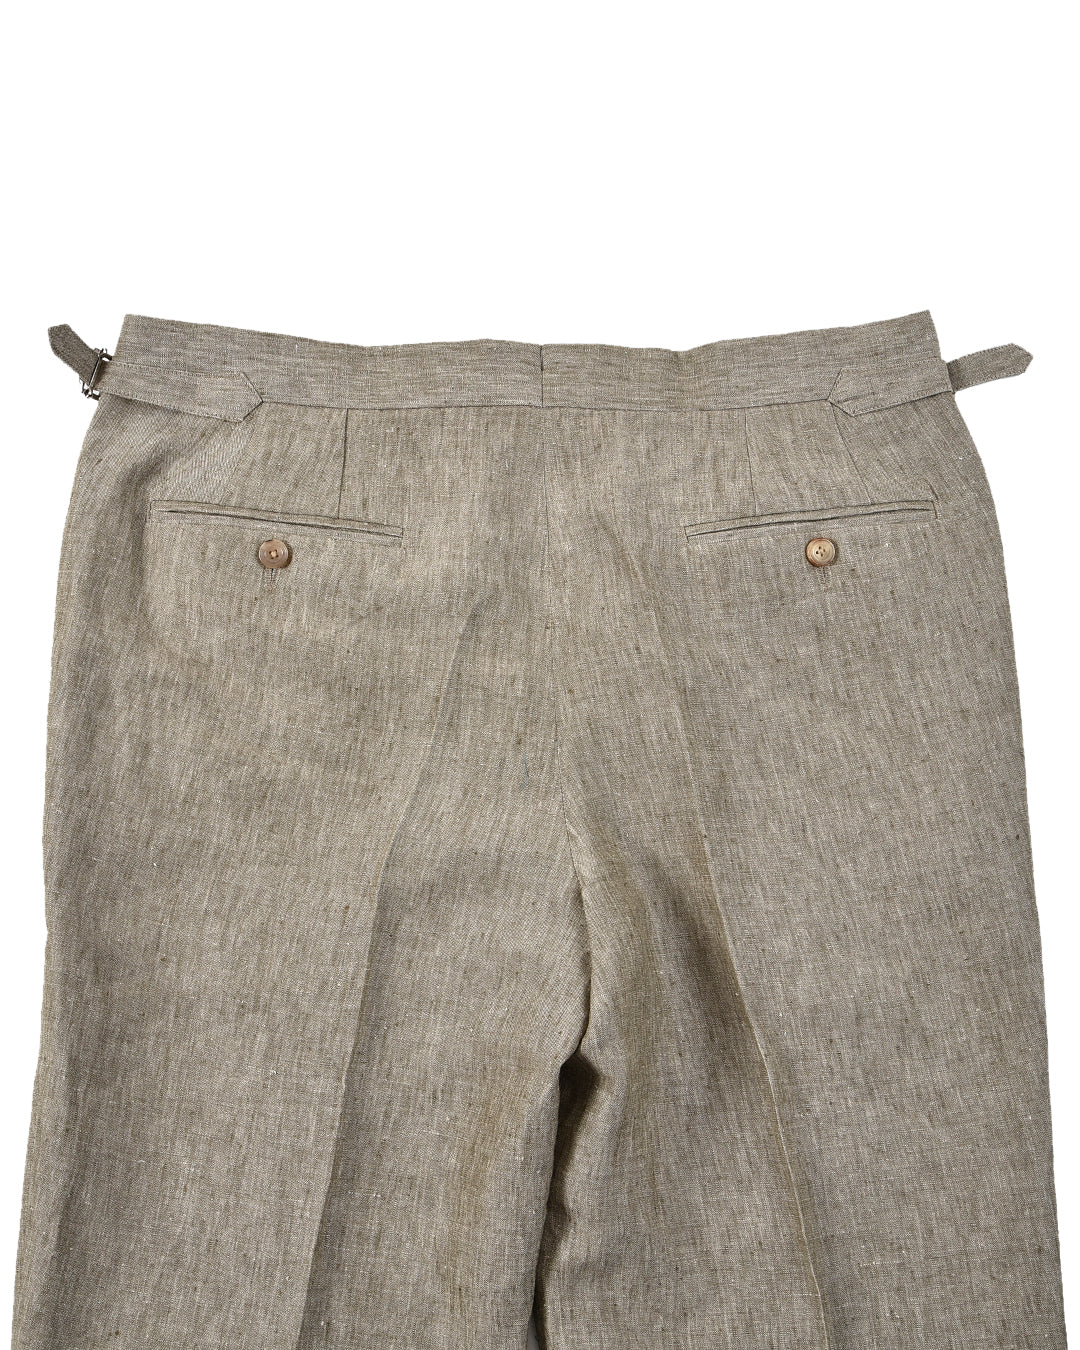 Back view of custom linen pants for men by Luxire in light olive